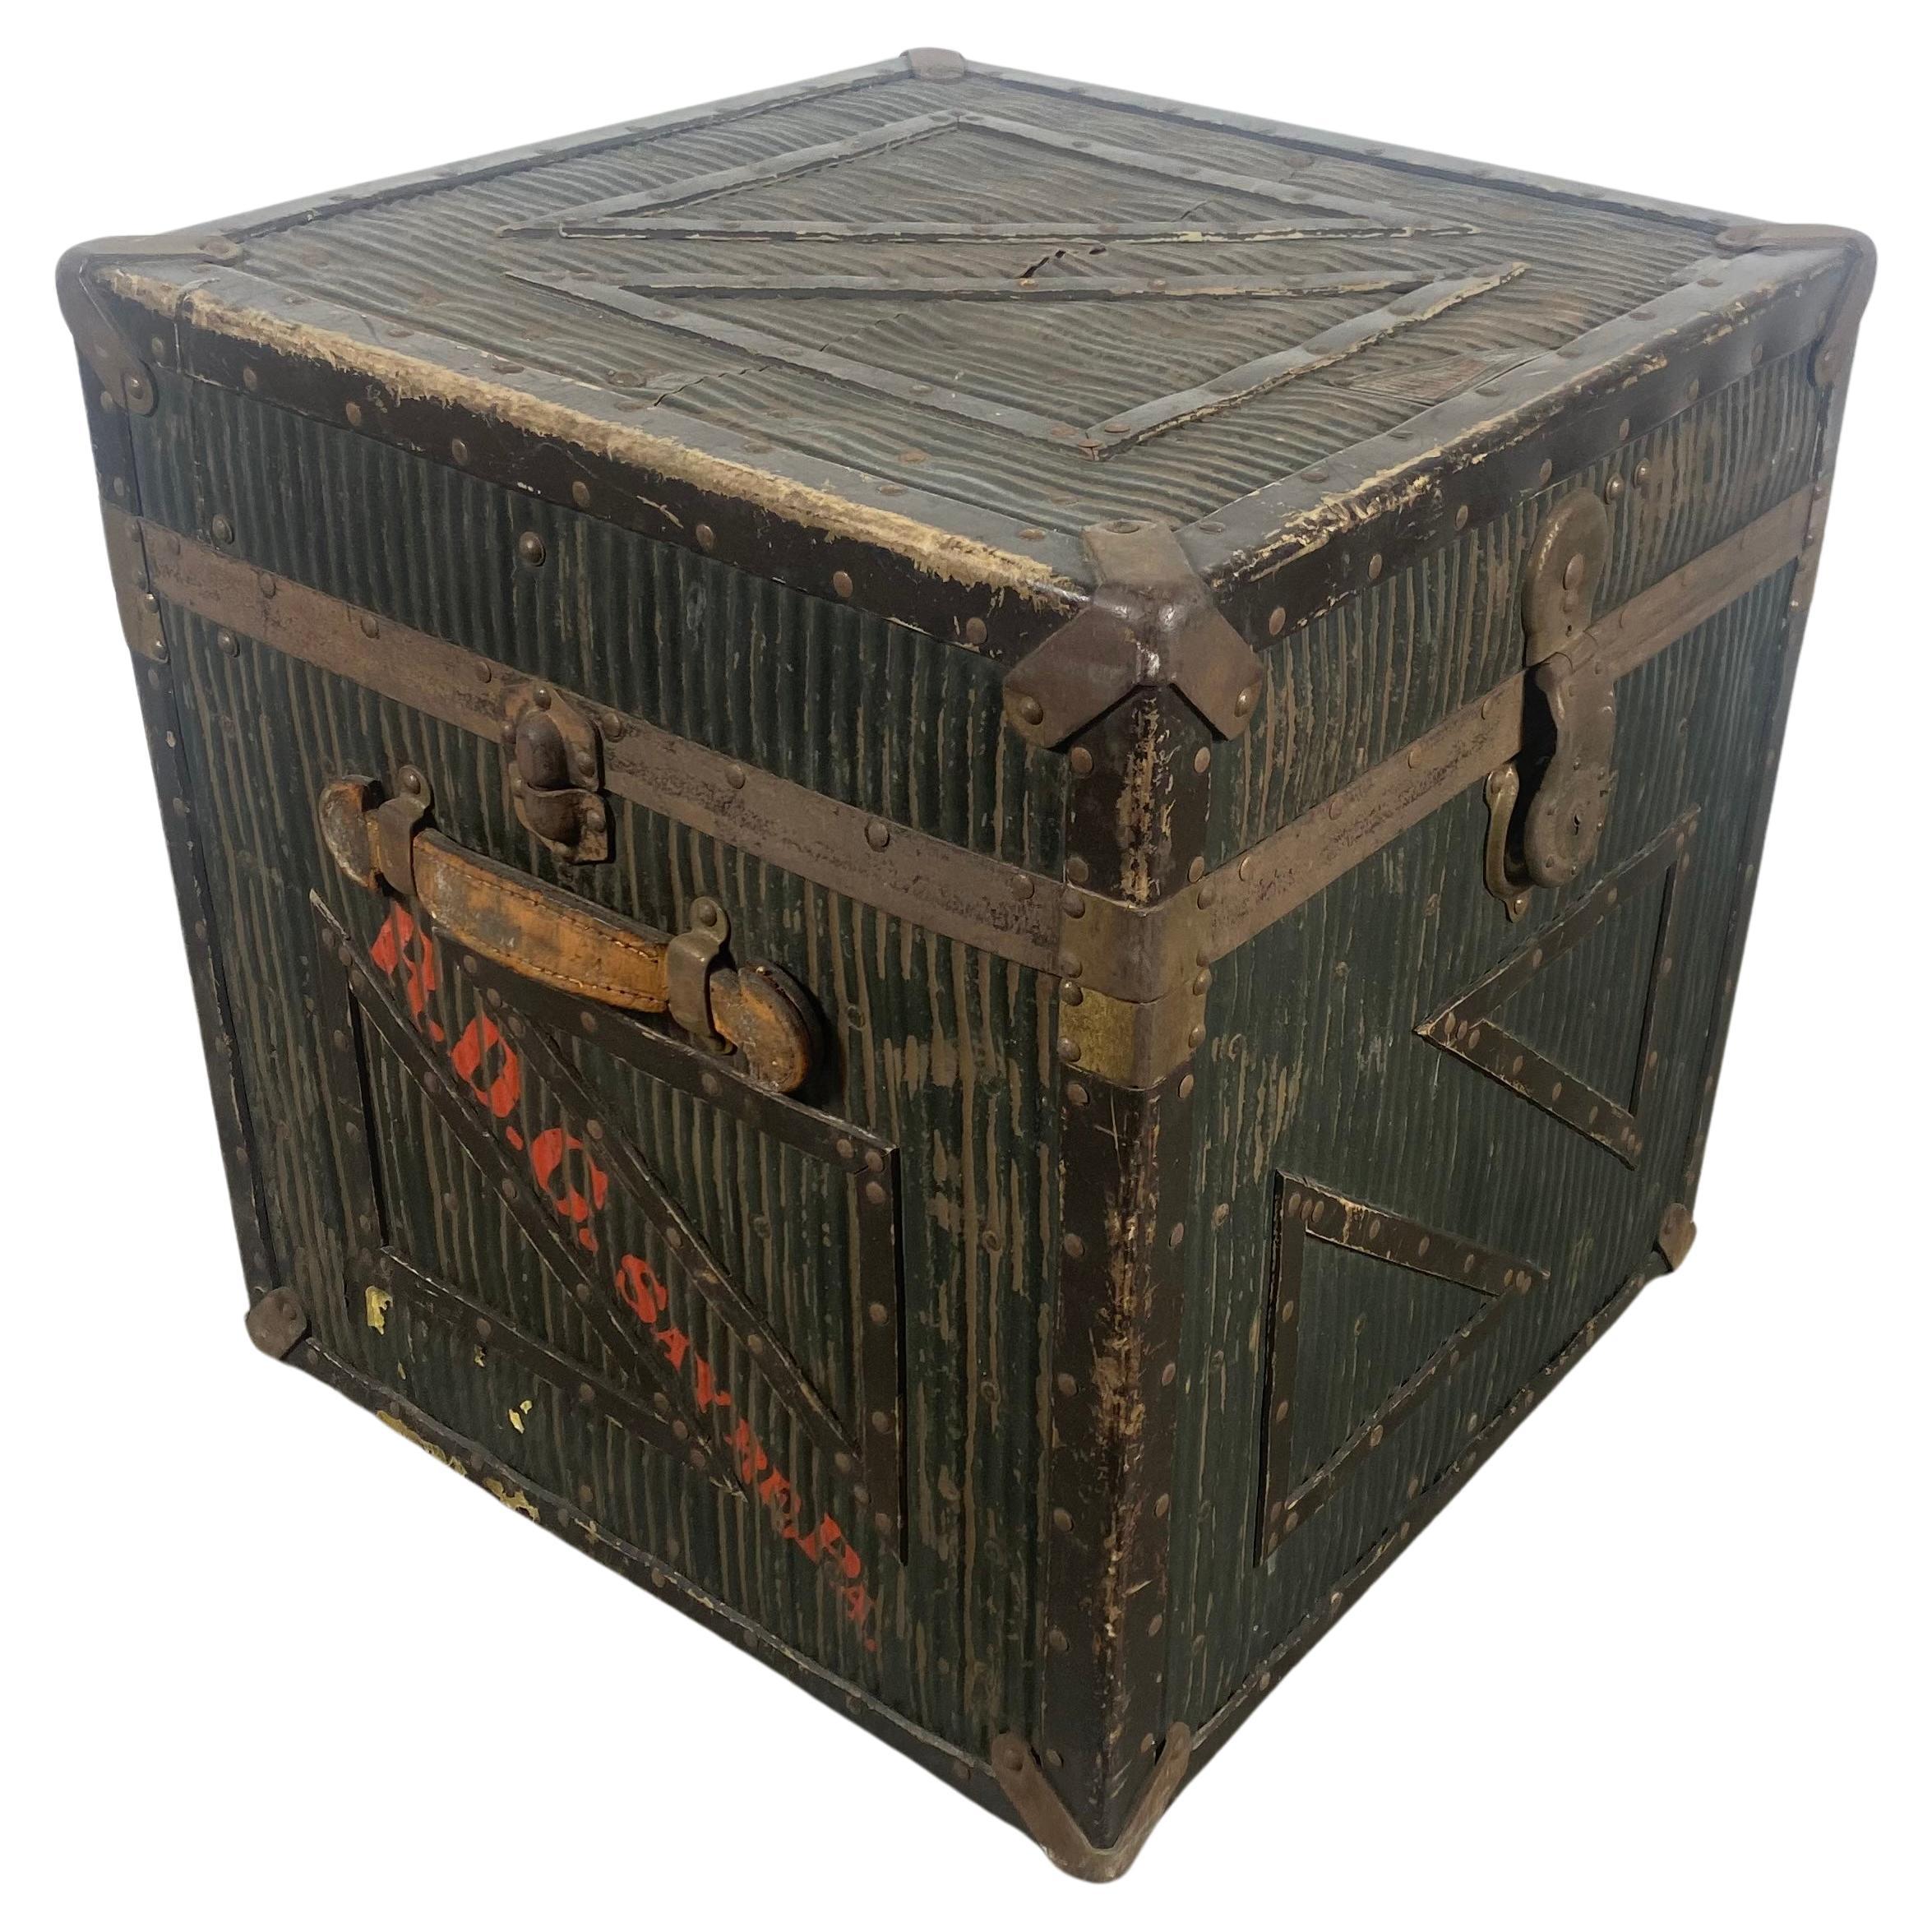 19th Century Travel Trunk by Innovation, , , great size 25 x 25 x25 For Sale